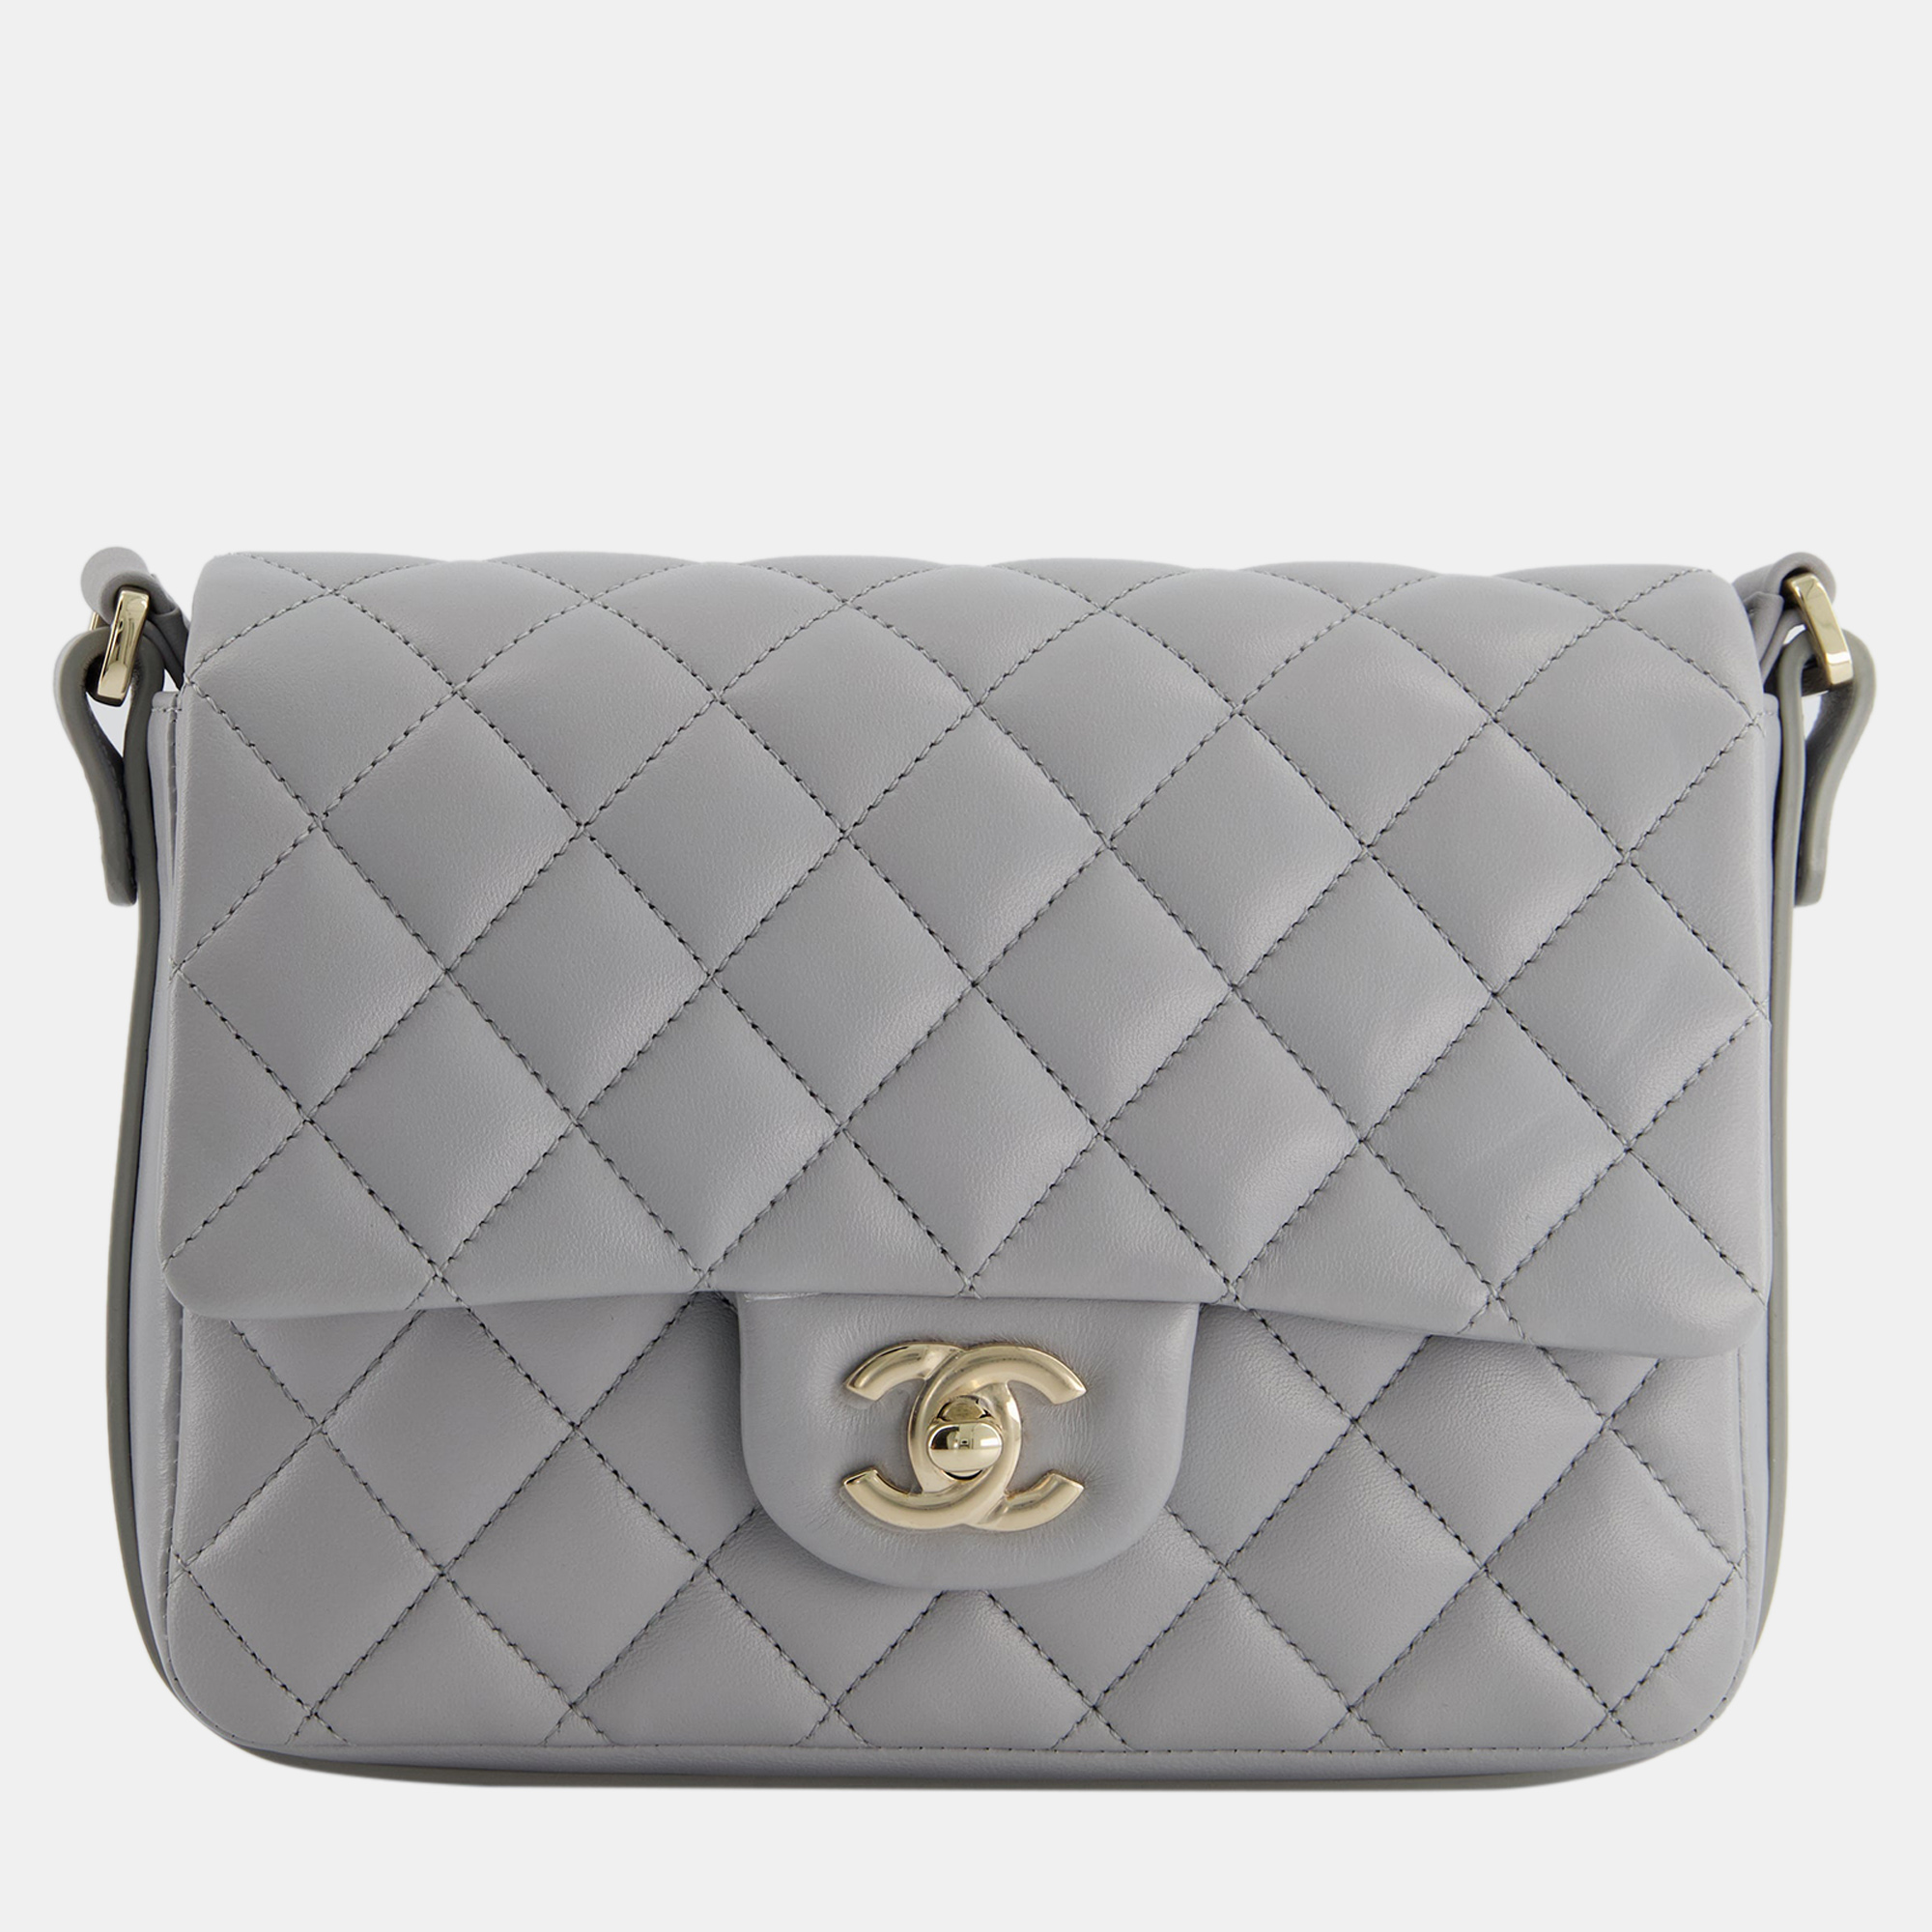 Chanel wave strap bag in dove grey lambskin with champagne gold hardware